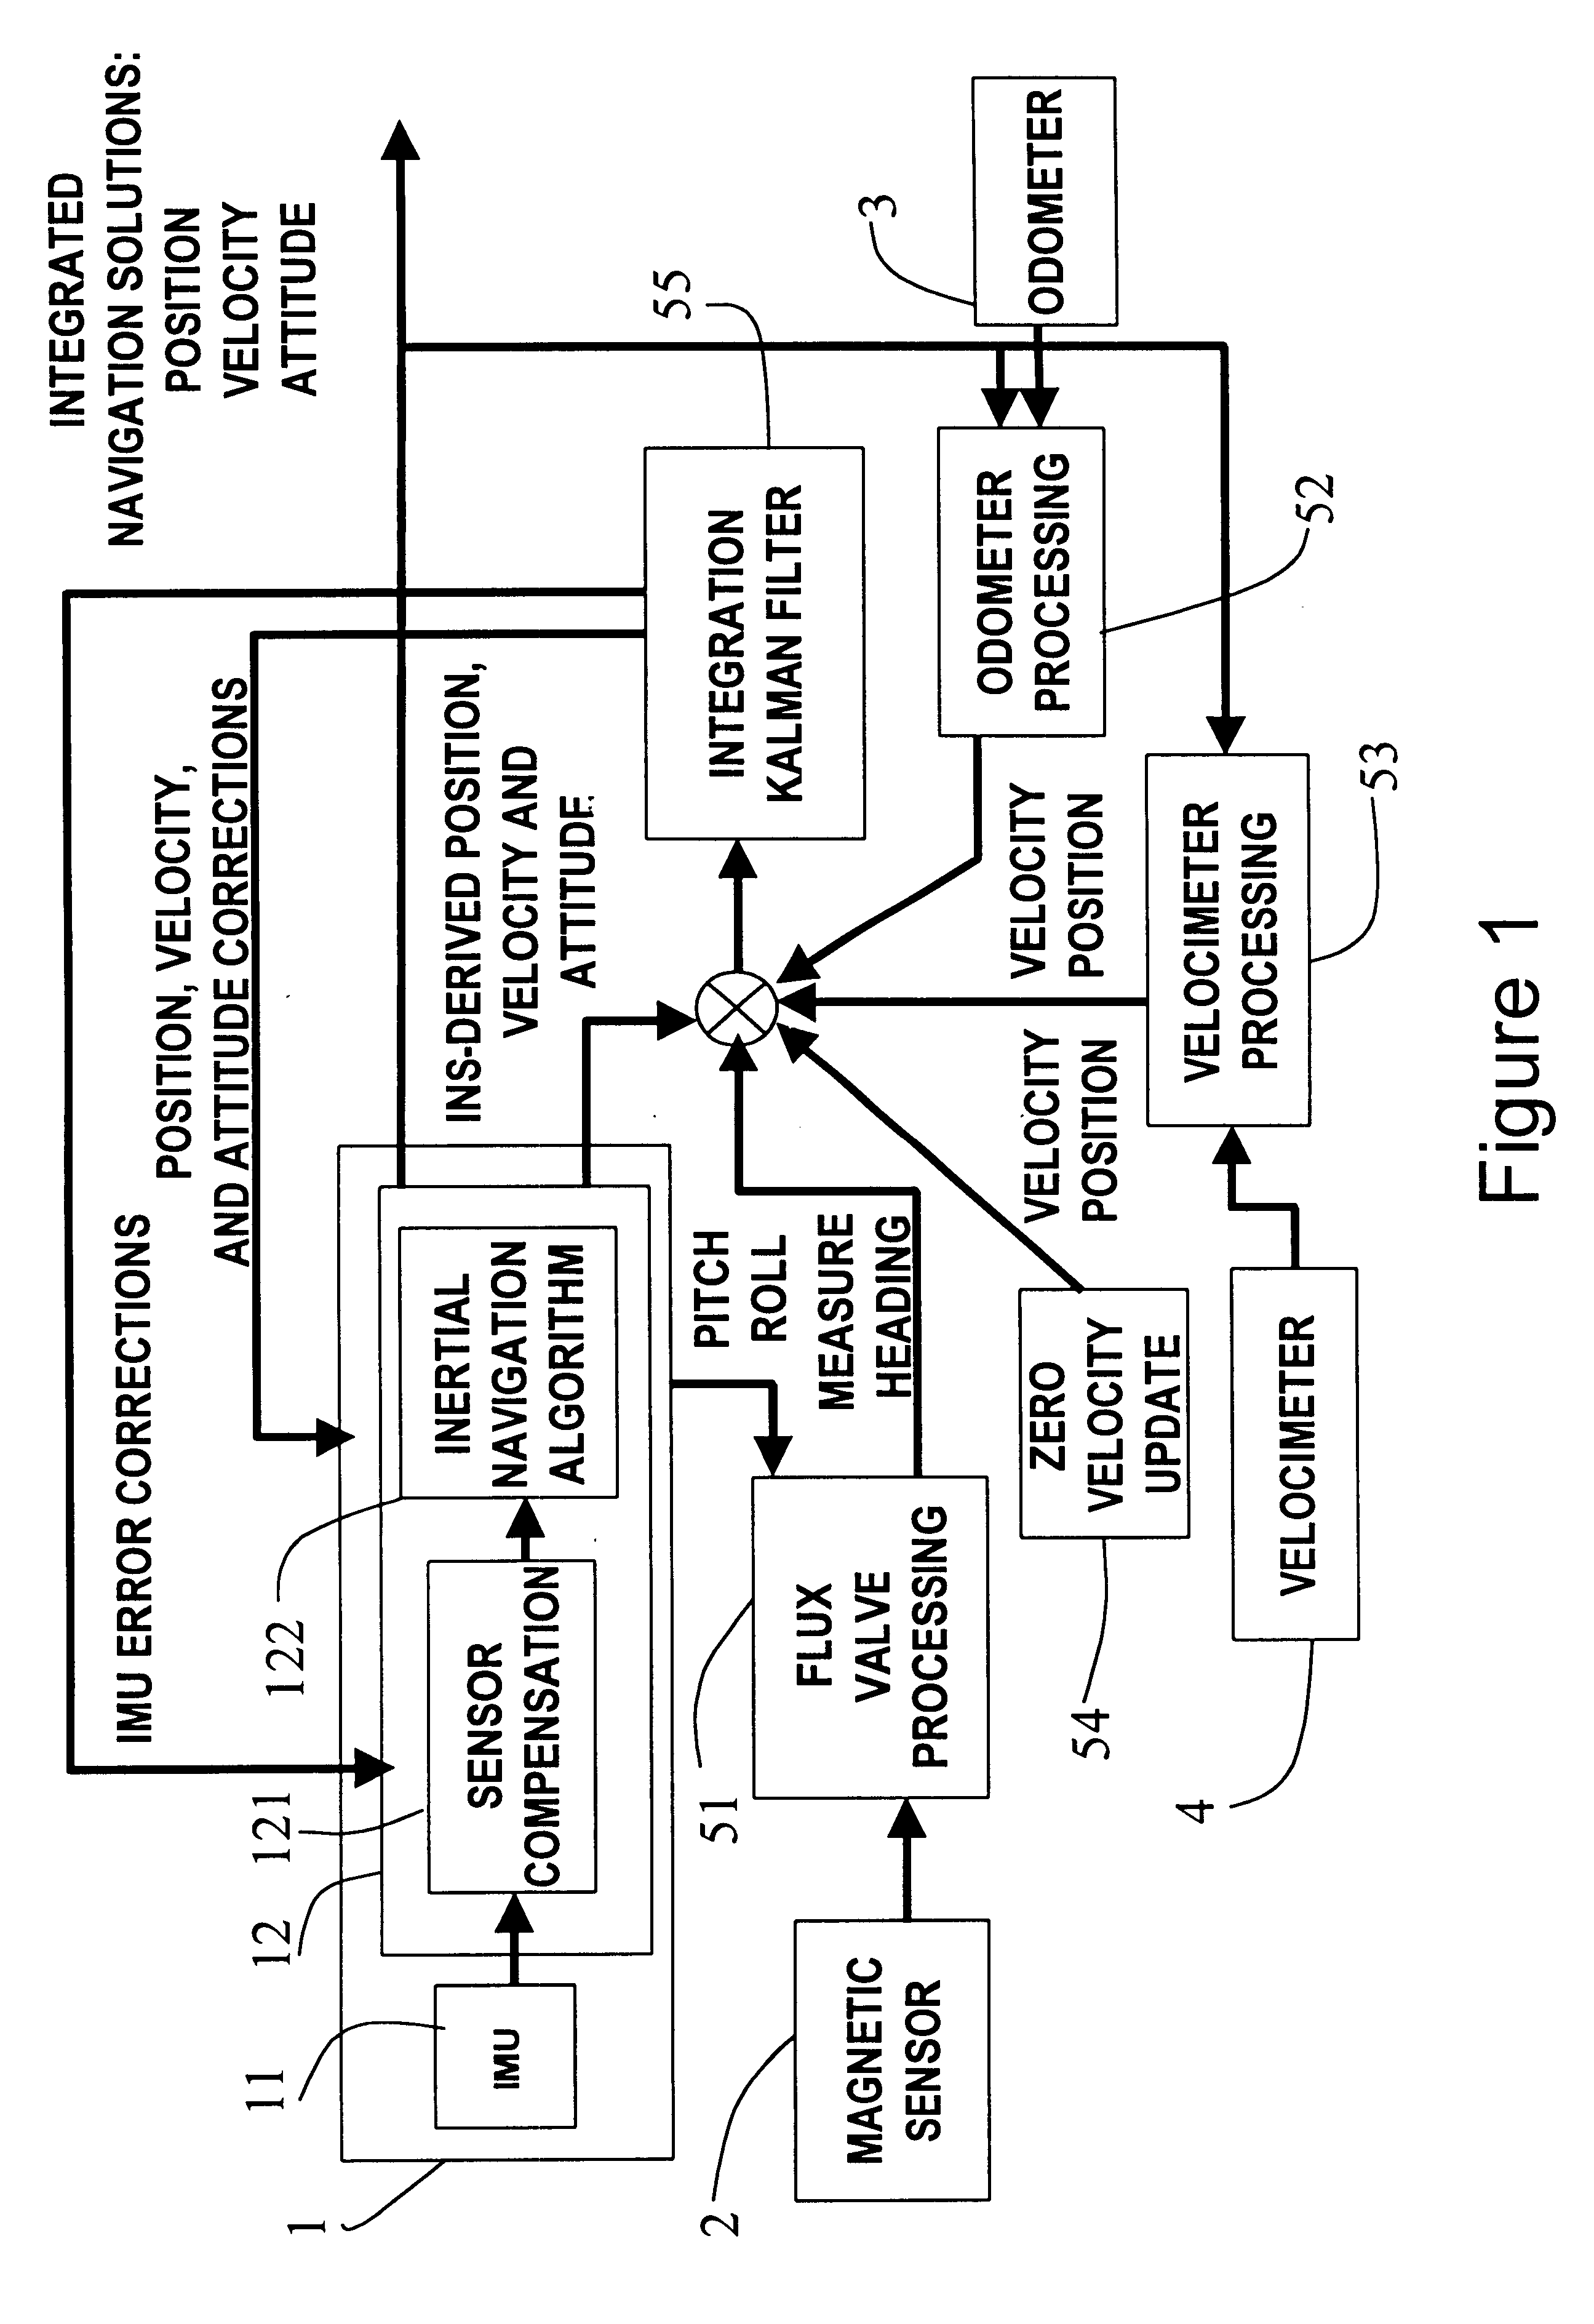 Self-contained positioning method and system thereof for water and land vehicles